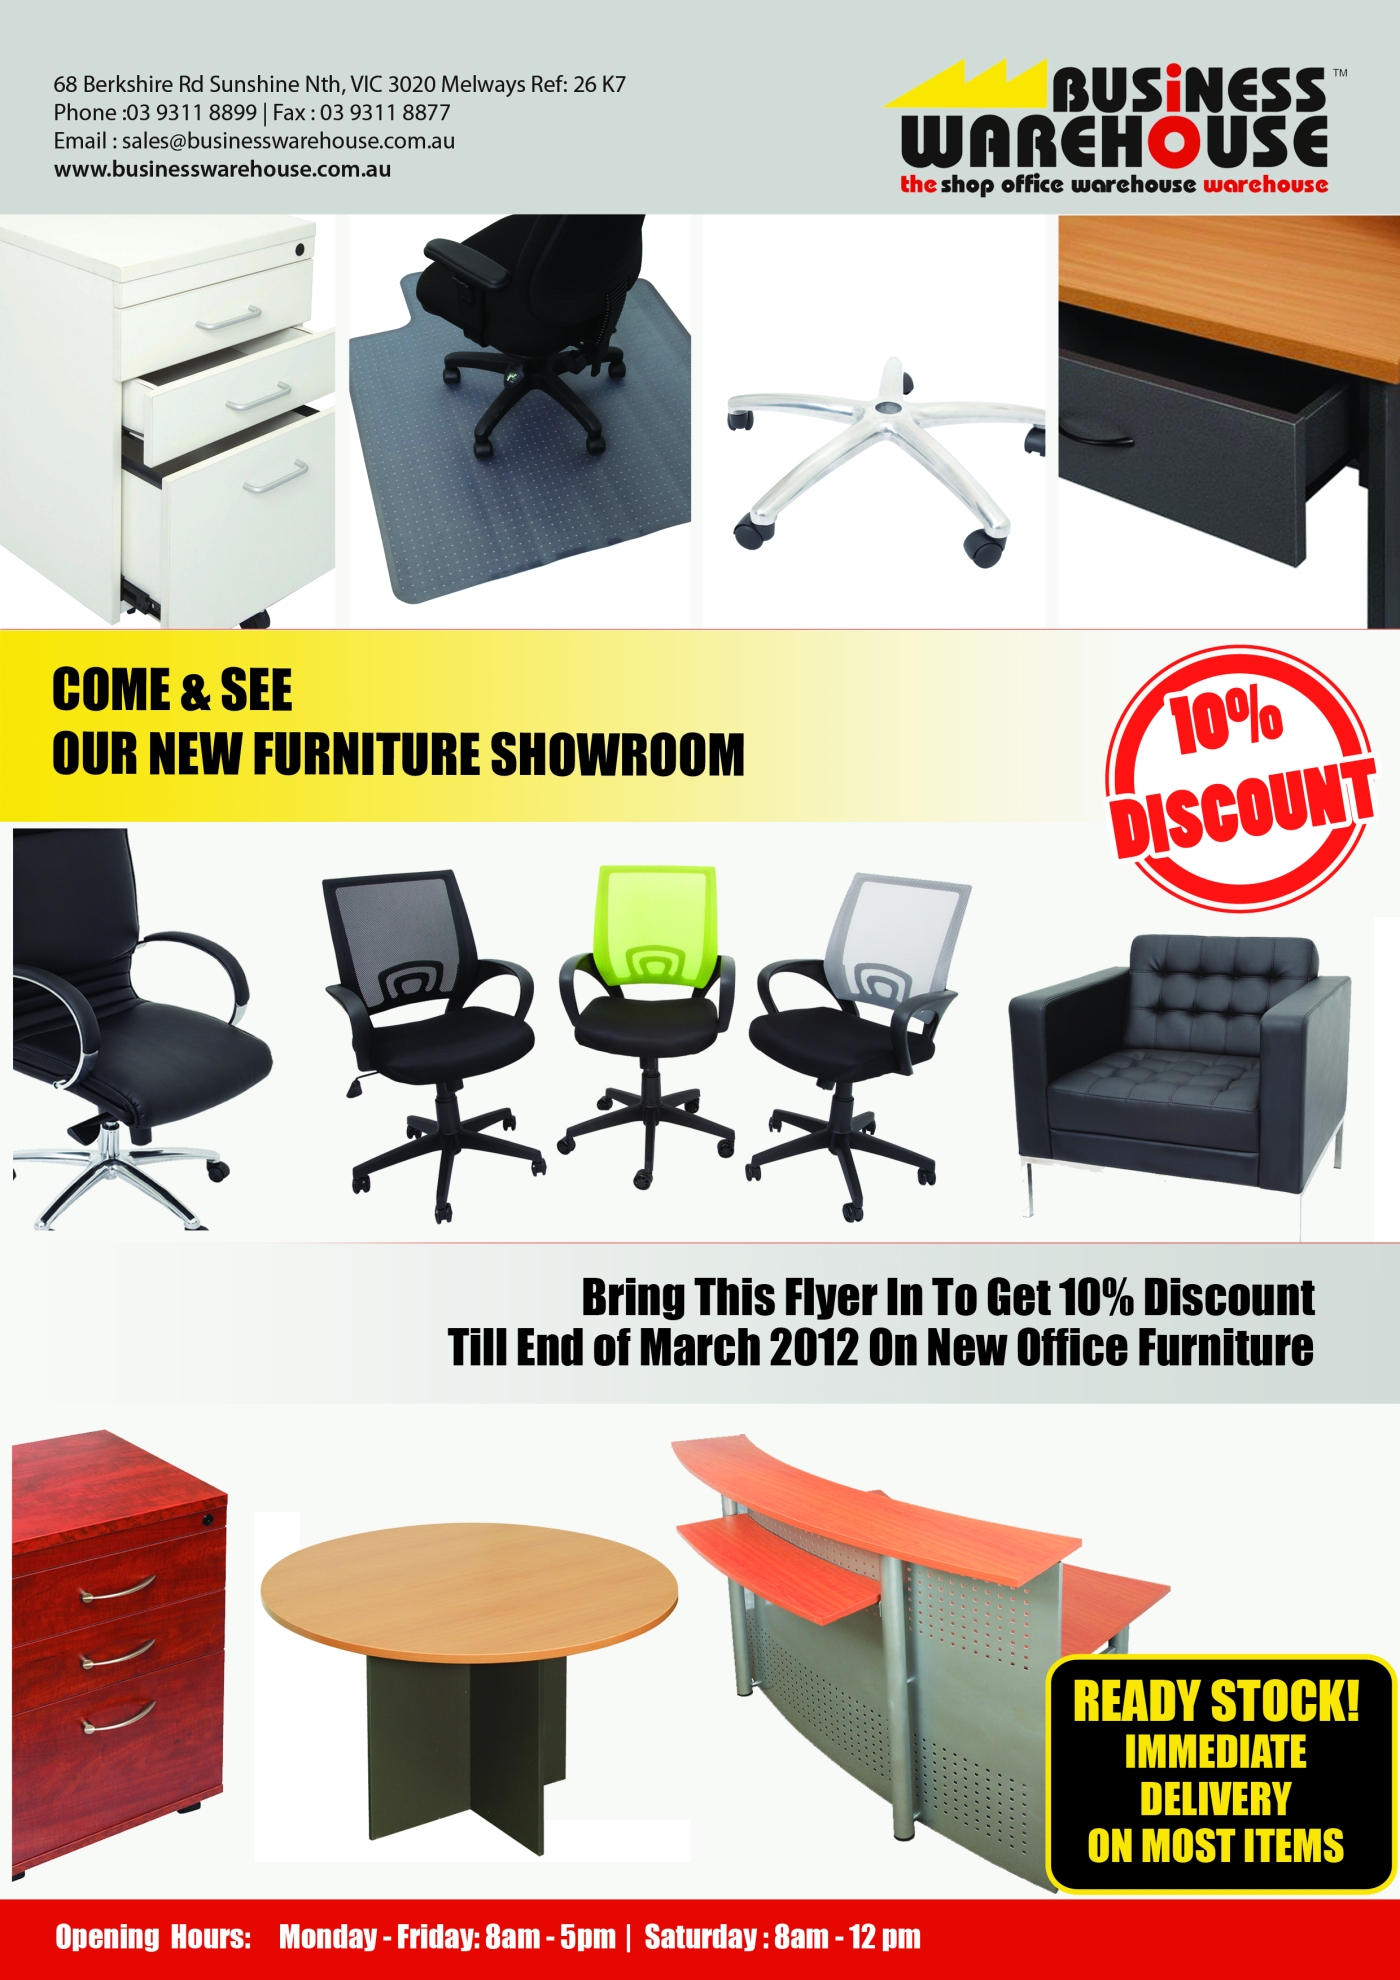 10 Discount On All Of Our Office Furniture Product